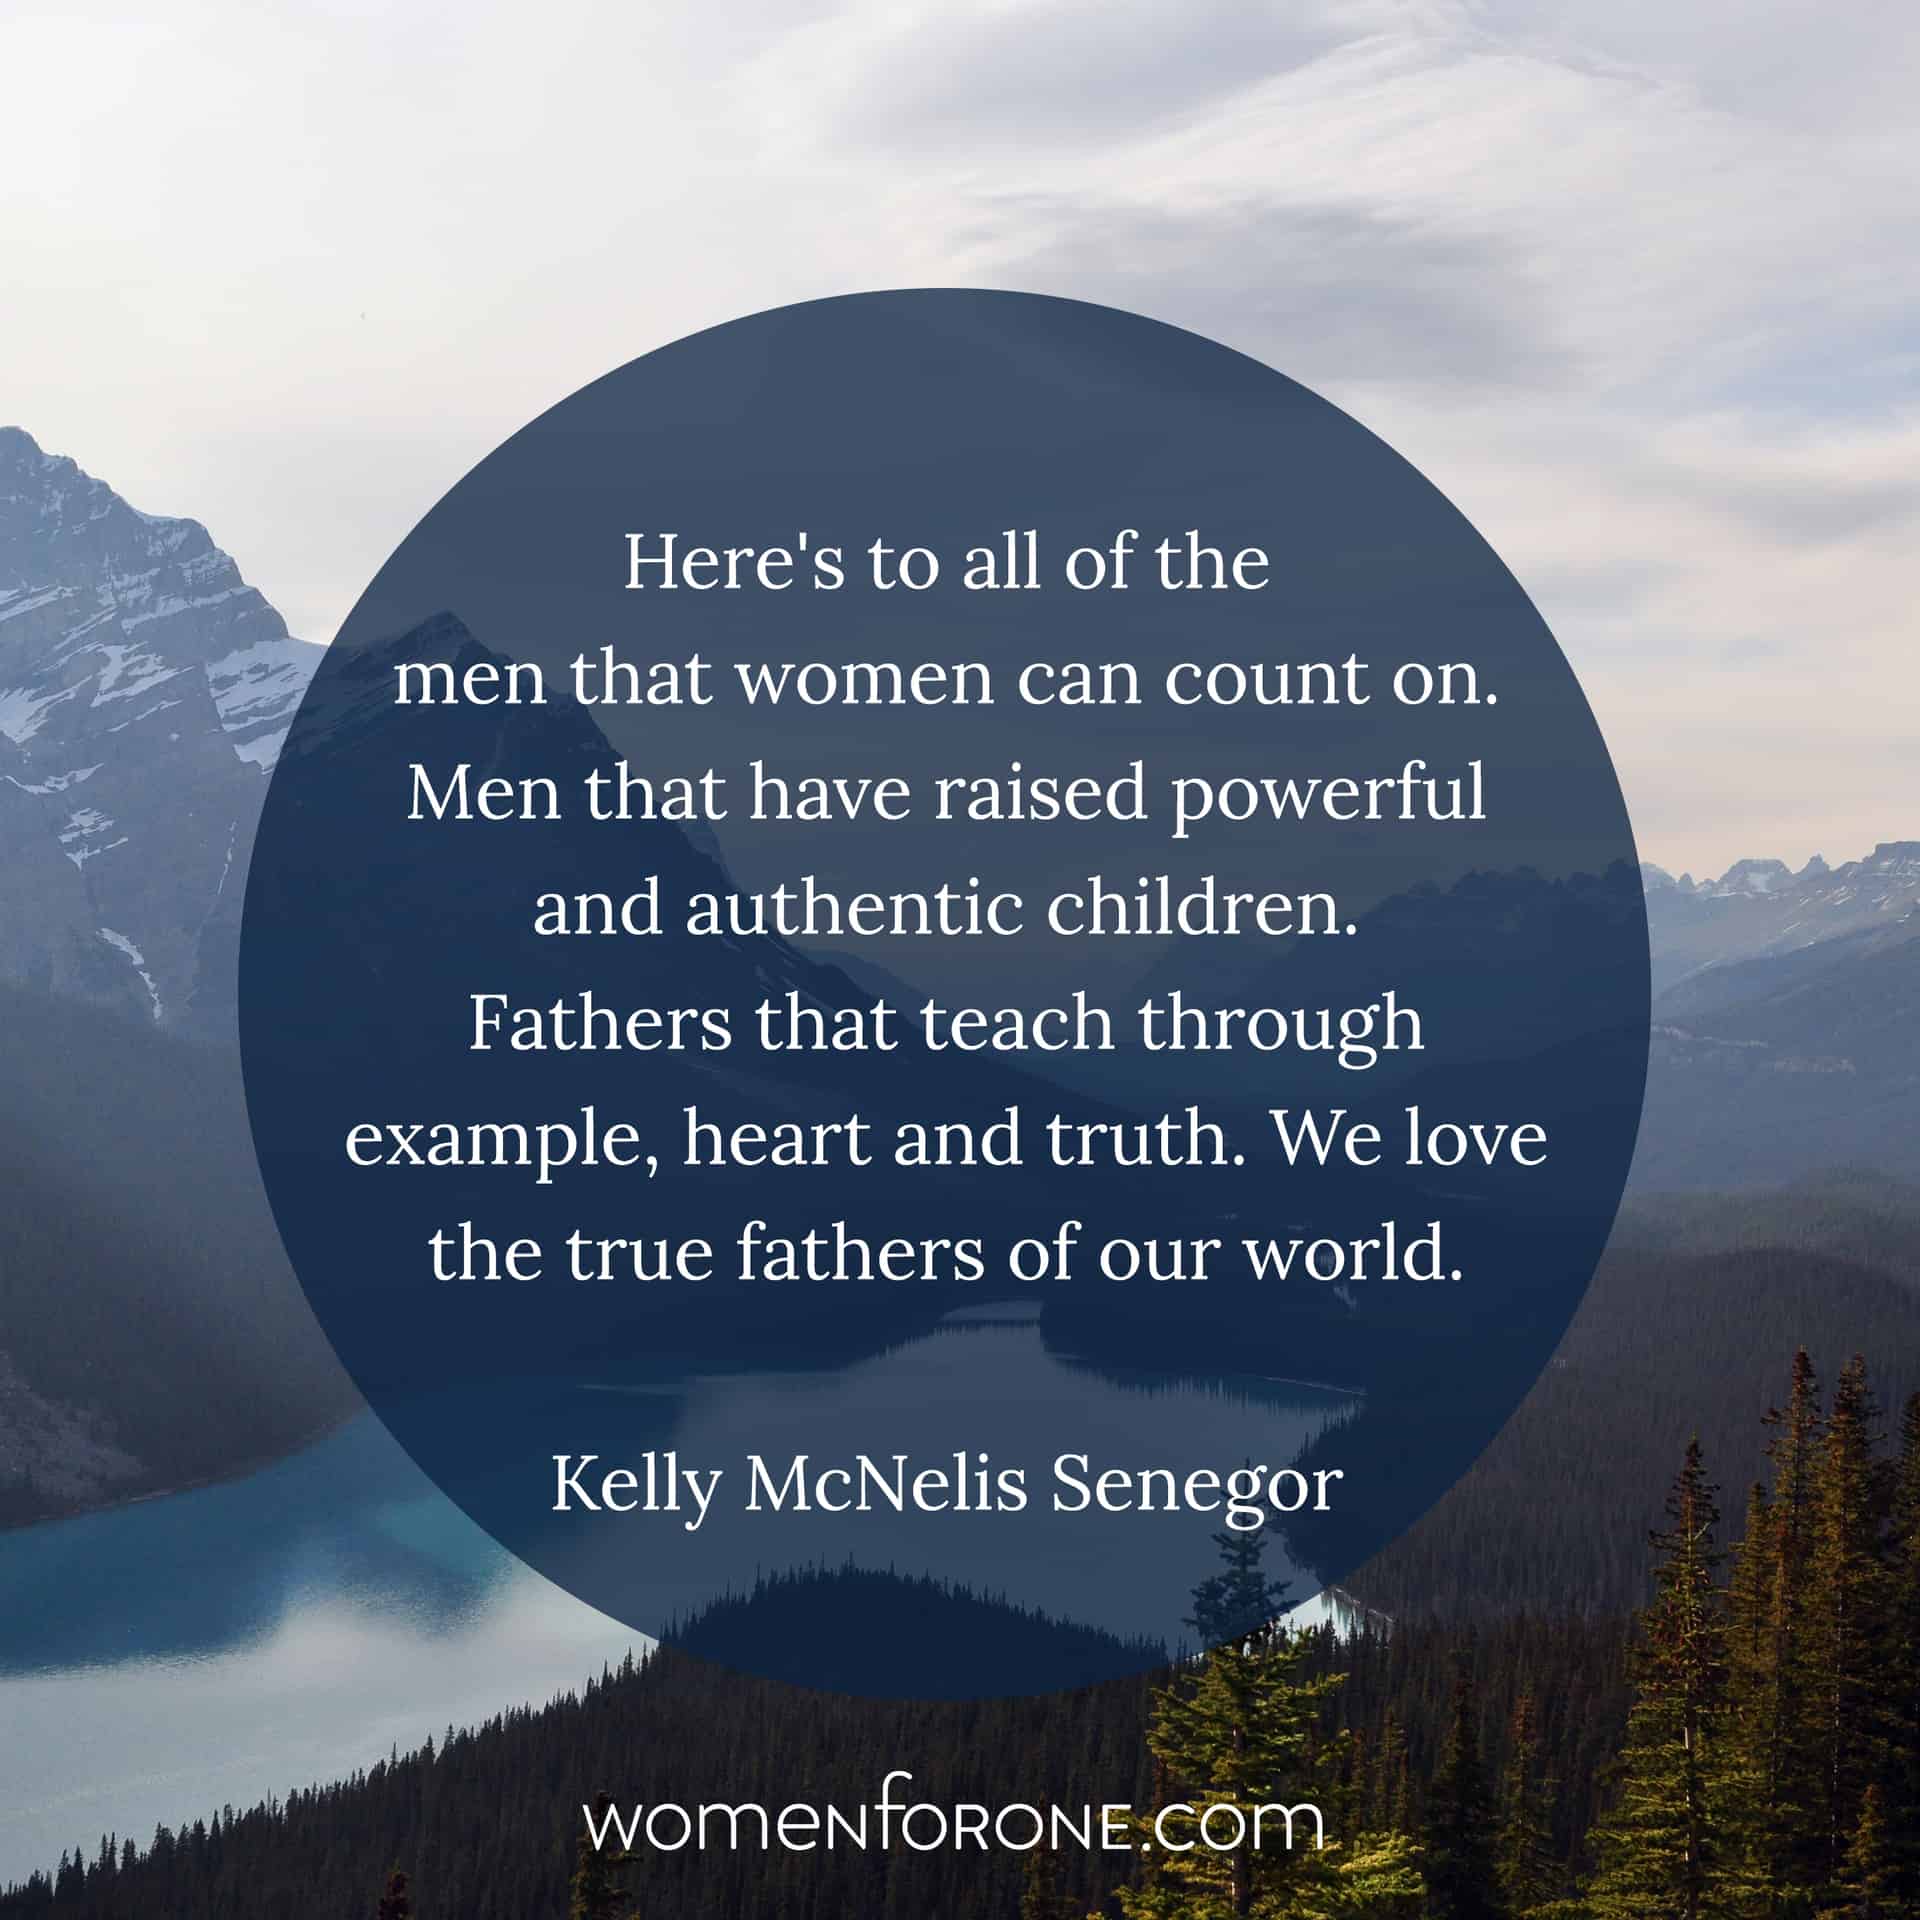 Here's to all the men that women can count on. Men that have raised powerful and authentic children. Fathers that teach through example, heart and truth. We love the true fathers of the world. - Kelly McNelis Senegor